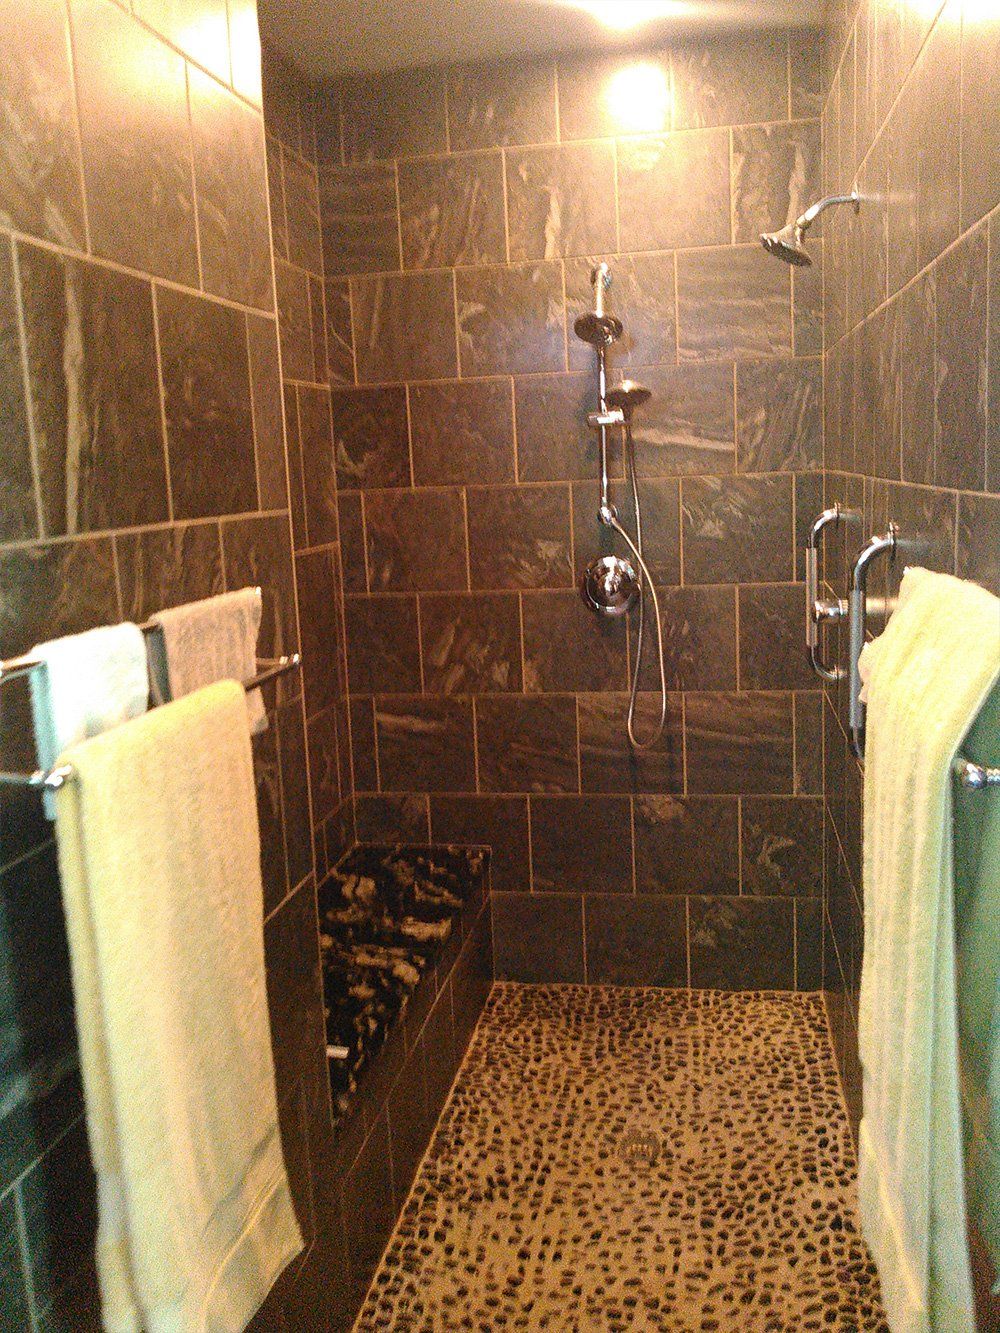 Interior of Shower - Remodeling Services in Slippery Rock, PA